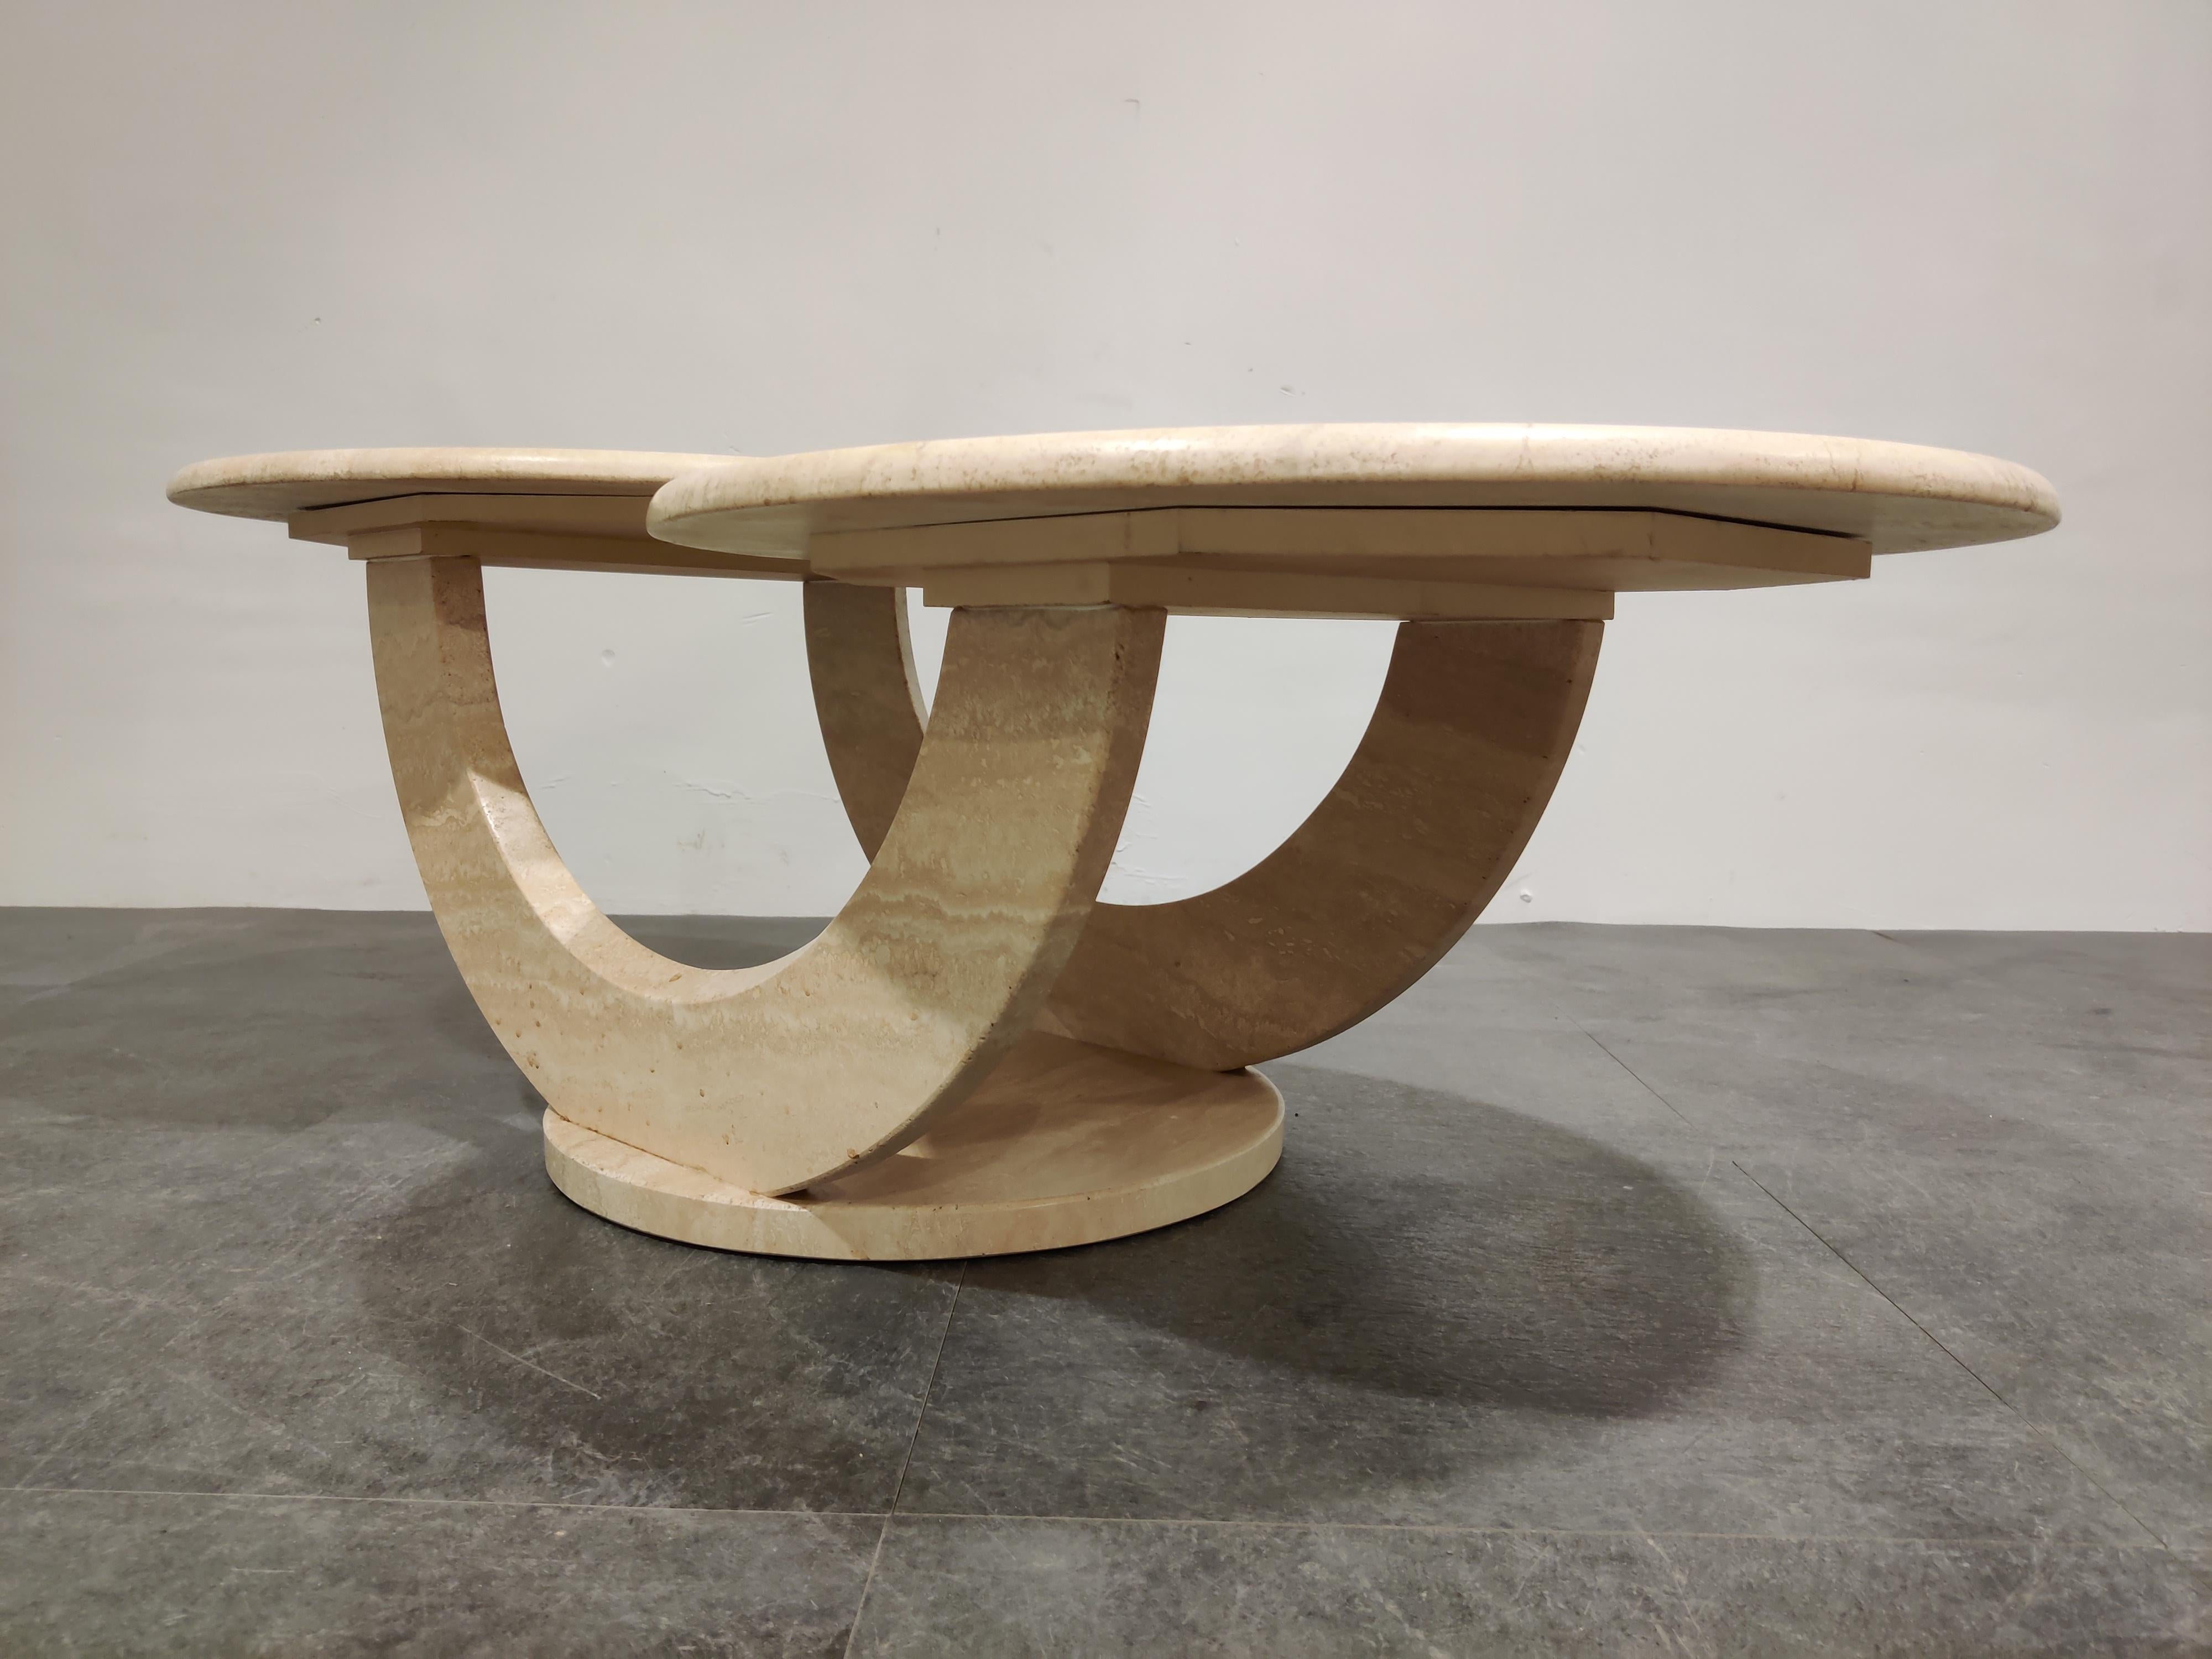 Timeless travertine coffee tables with two round tops.

Beautiful arched base.

Good condition.

1970s - Italy

Dimensions:
Height: 42cm/16.53